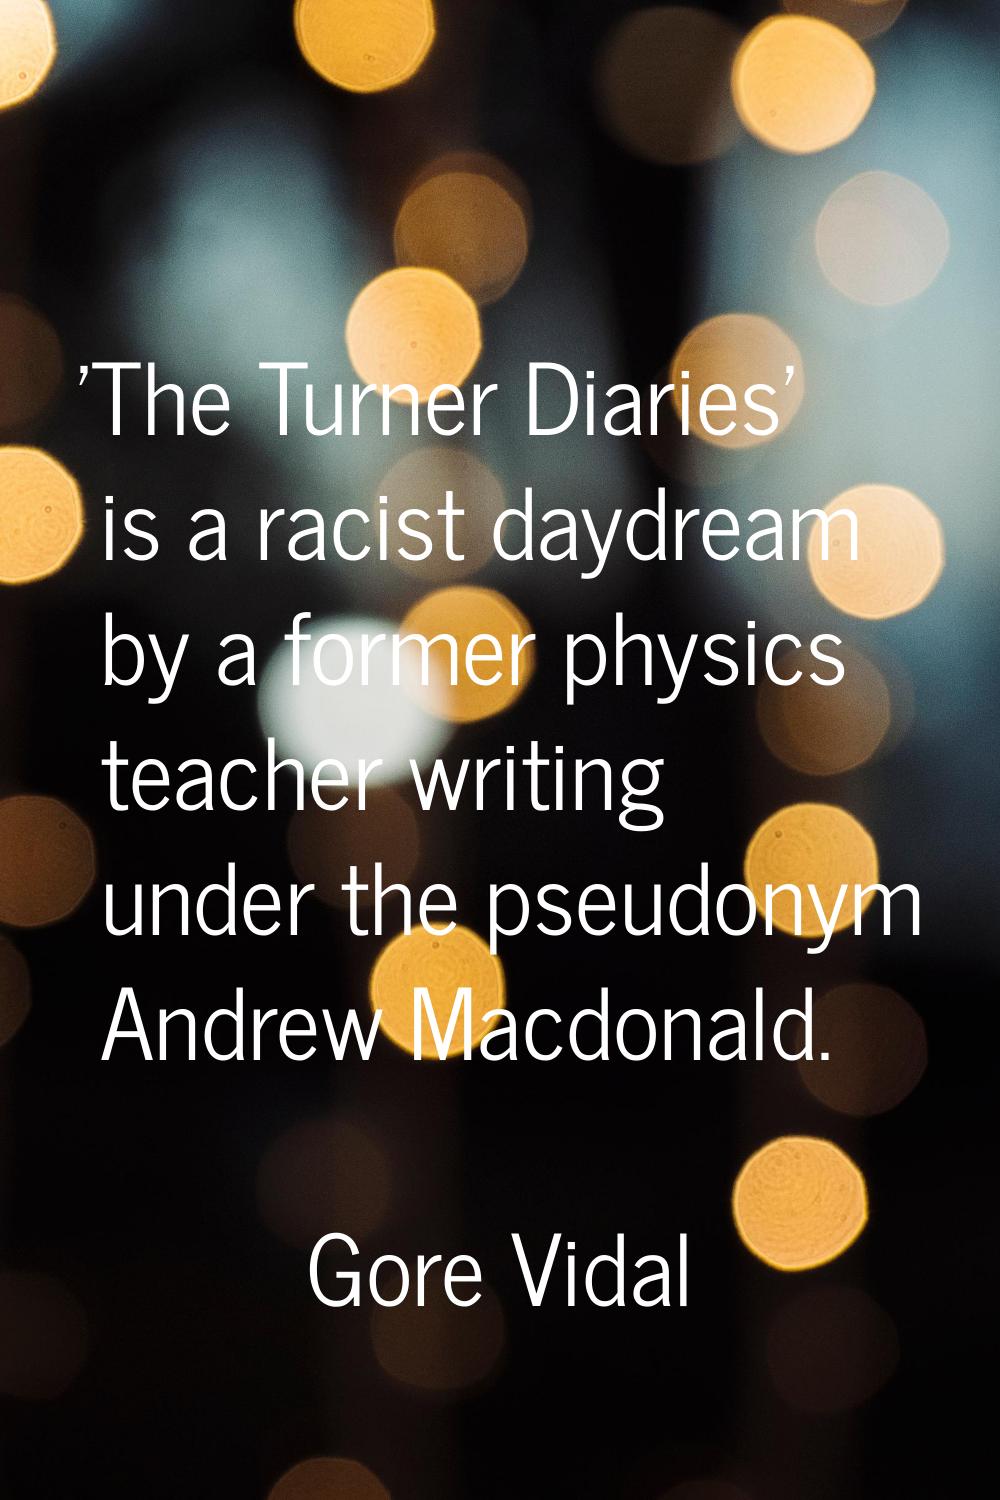 'The Turner Diaries' is a racist daydream by a former physics teacher writing under the pseudonym A